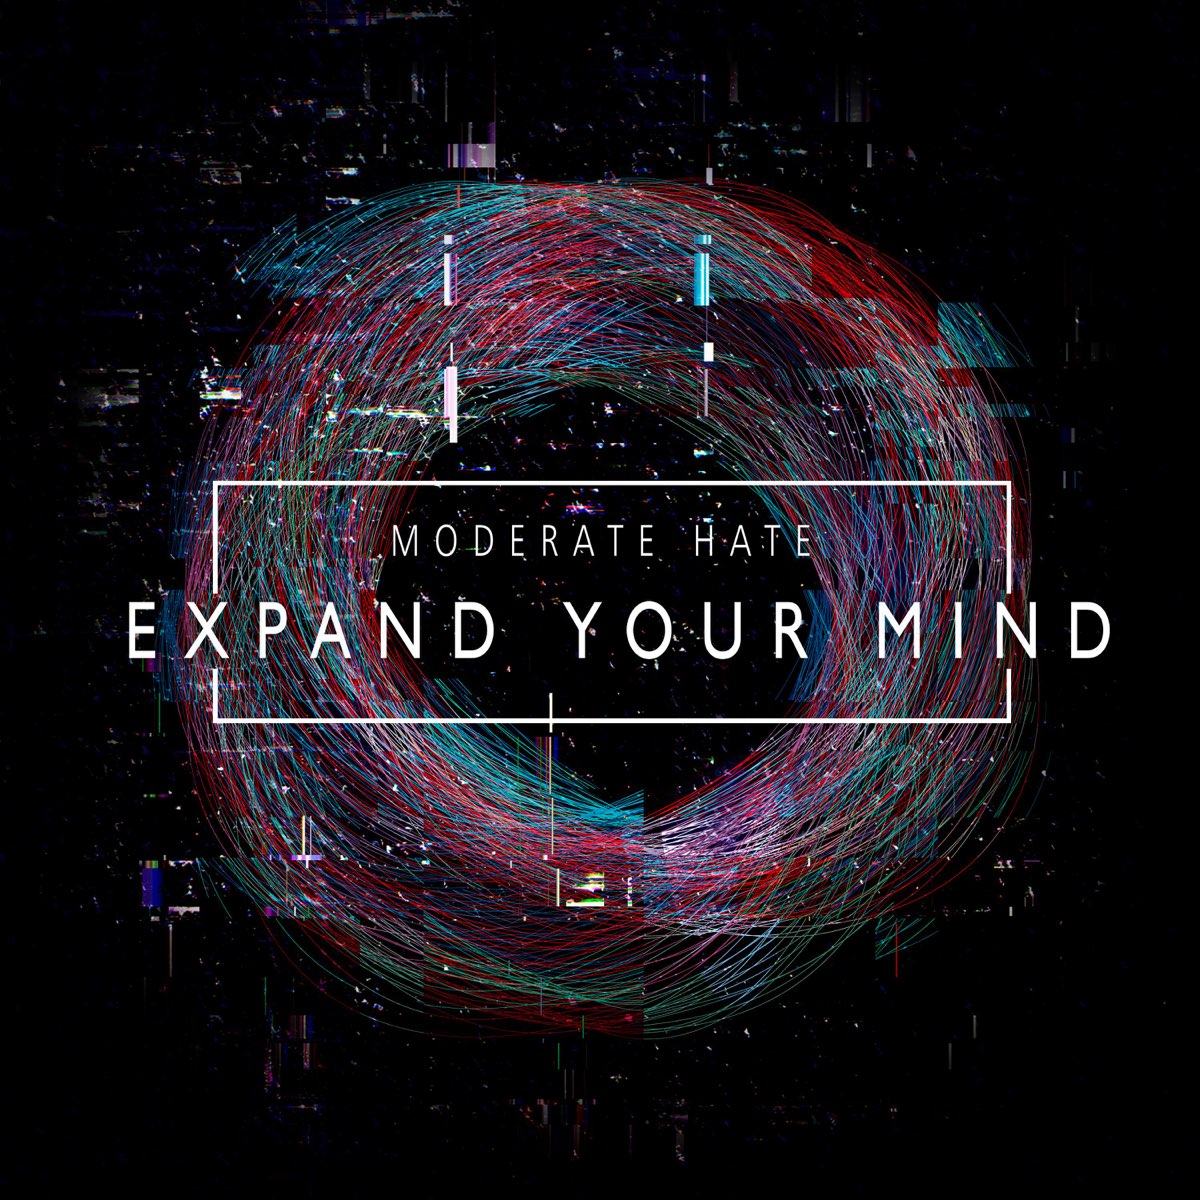 Expand Your Mind Single By Moderate Hate On Apple Music